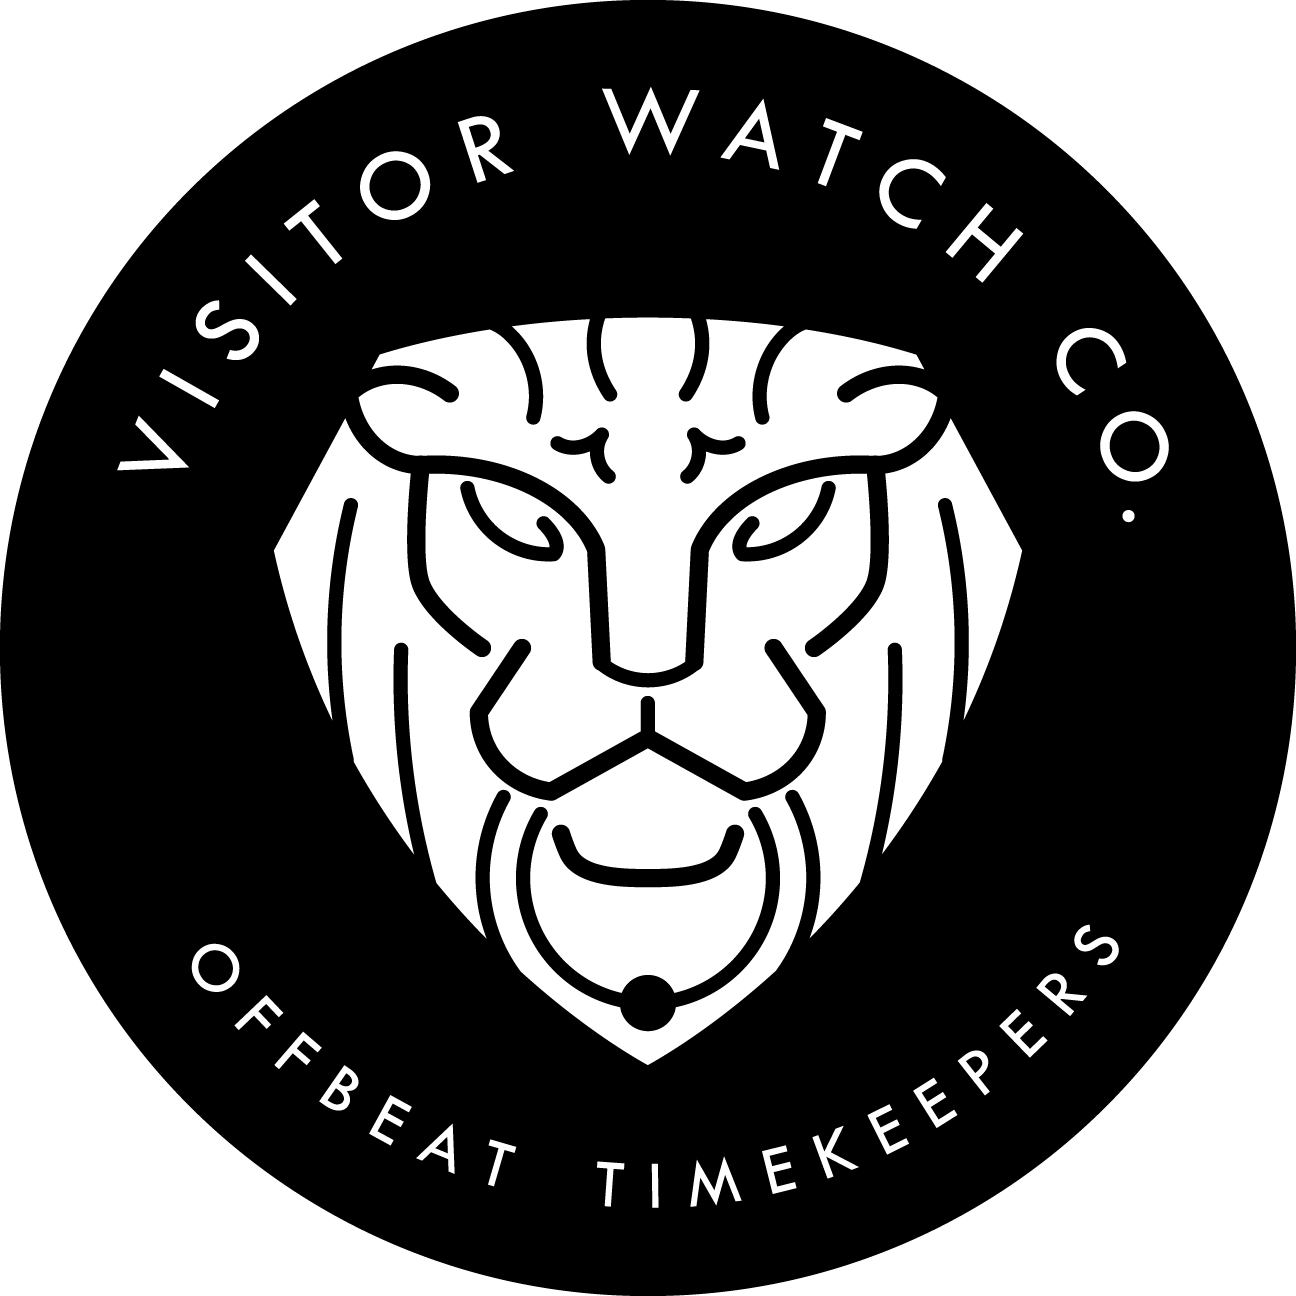 Visitor Watch Co.